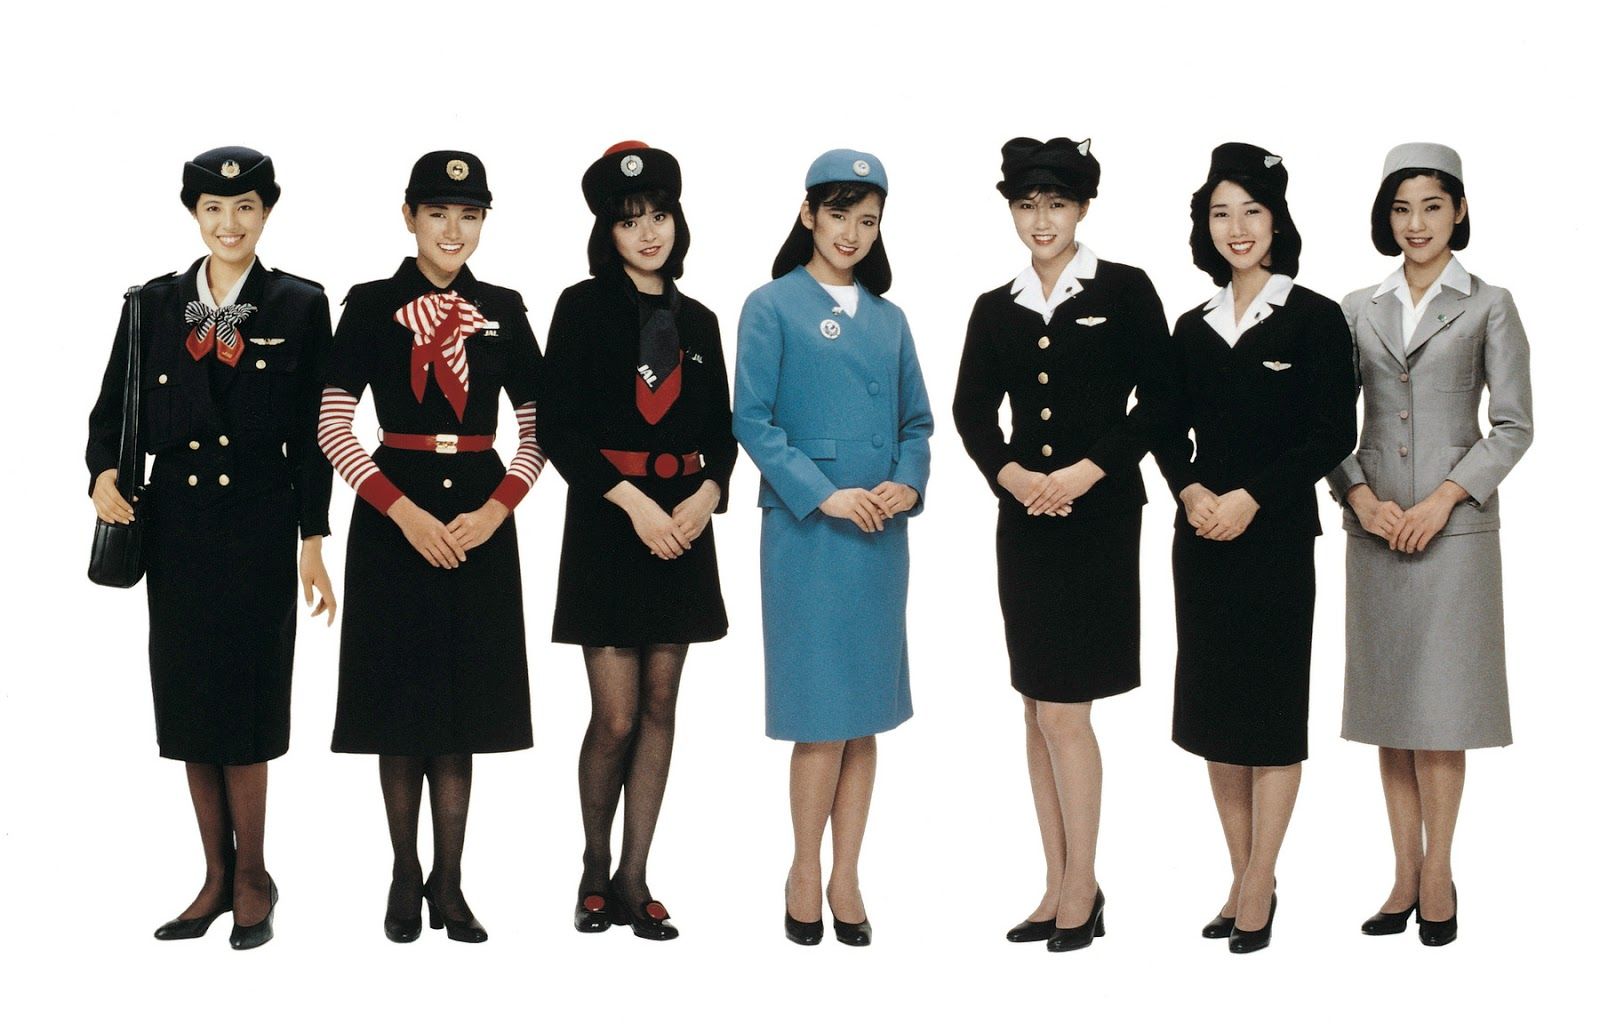 The flight attendants from the 1960s Japan Airlines used to wear the sky bl...